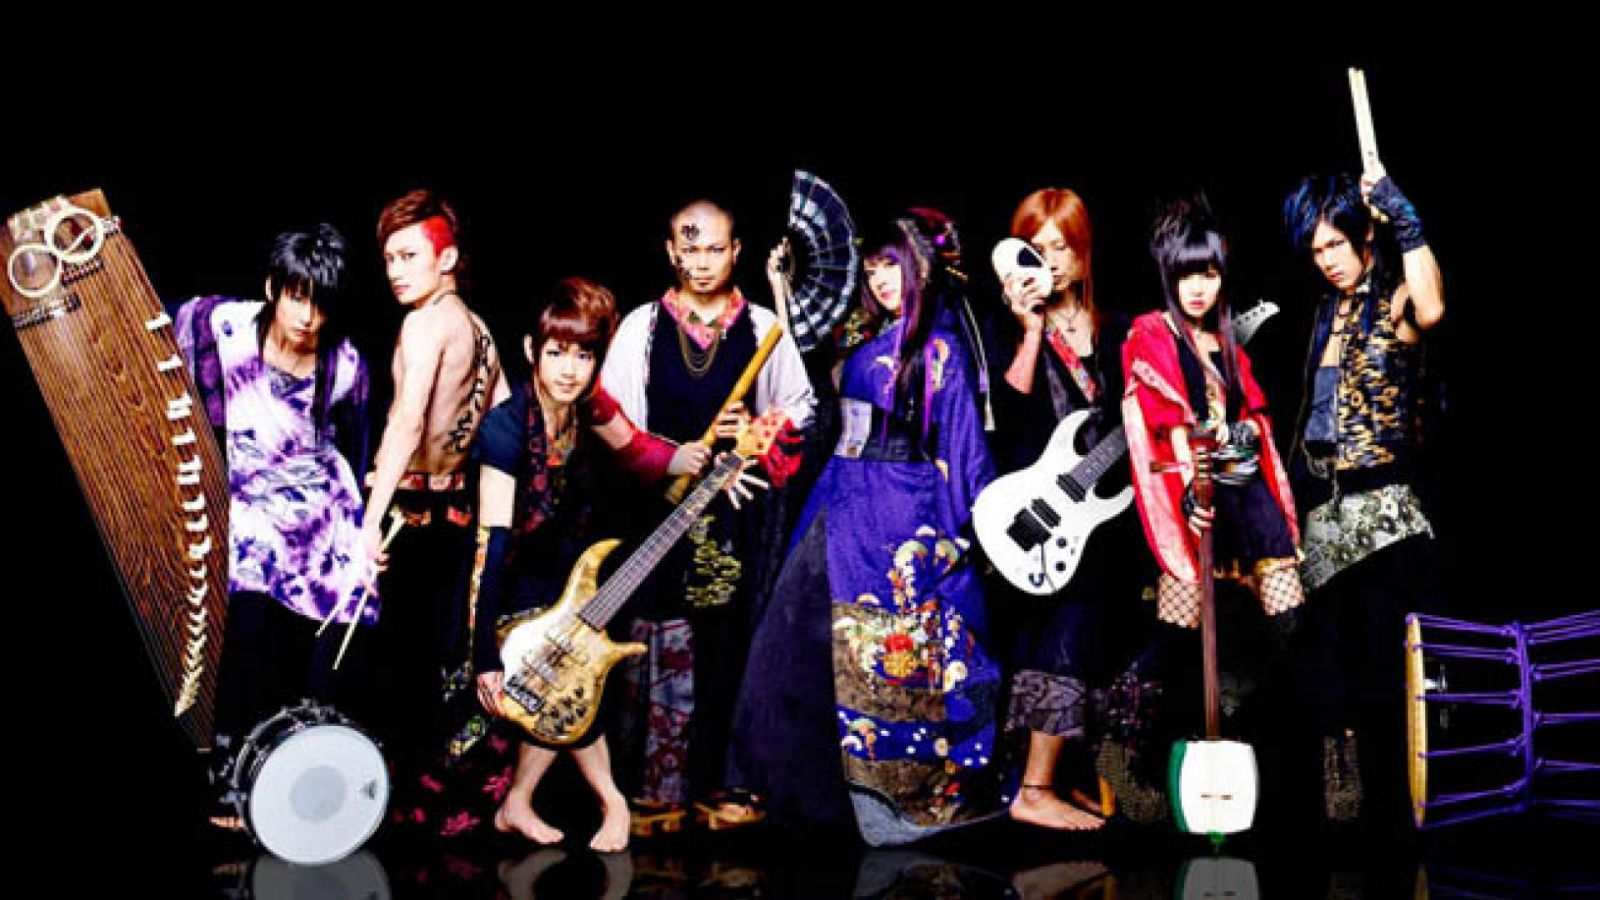 Die Wagakki Band mit neuem Release © avex entertainment | Wagakki Band | All Rights Reserved.